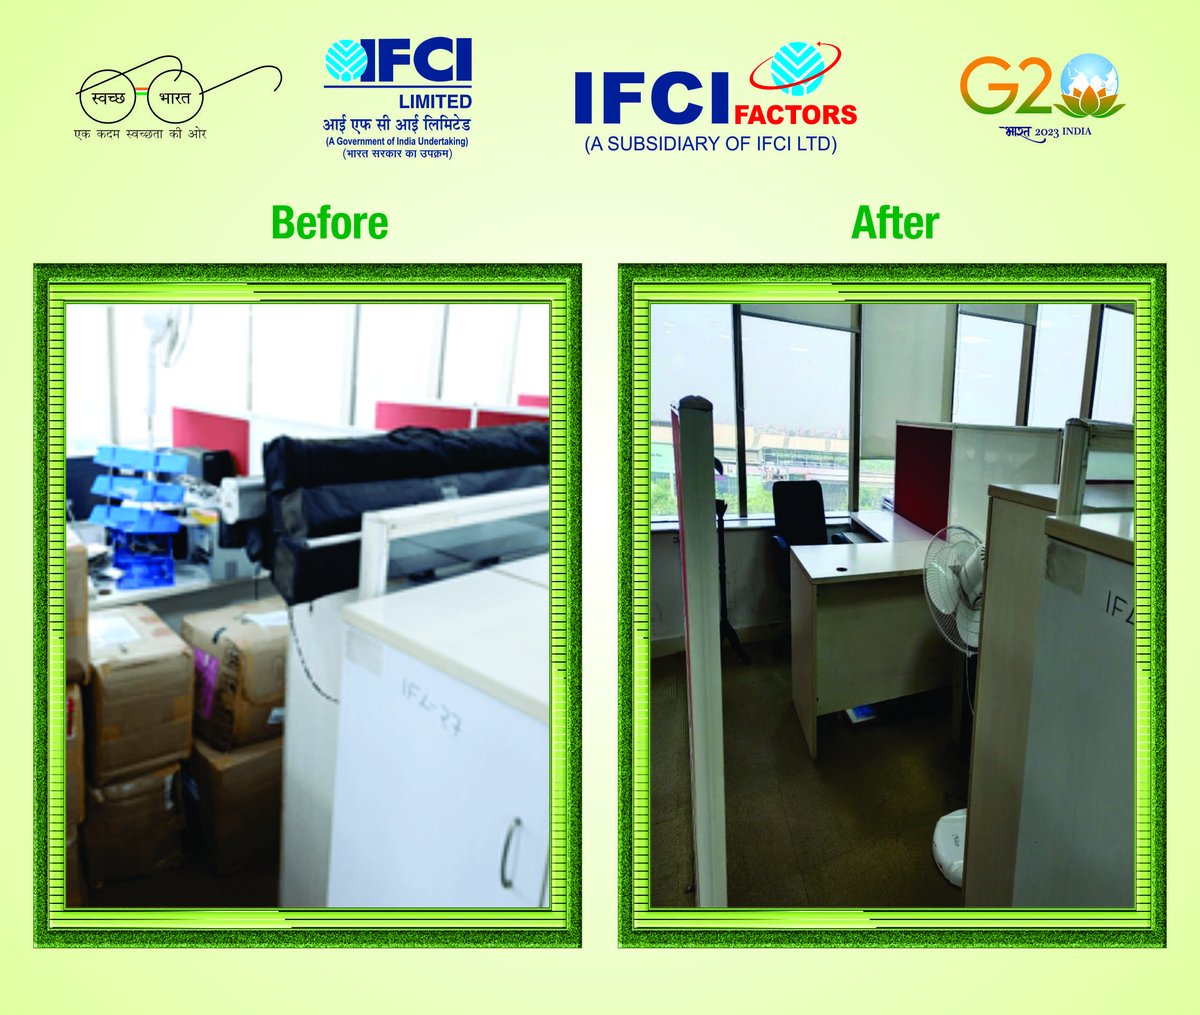 IFCI’s subsidiary IFCI Factors' participation in a cleanliness activity at its Head Office at New Delhi, under Special Campaign 3.0 #SwachhBharat #GarbageFreeIndia #SHS2023 @DFS_India @SwachhBharatGov @swachhbharat @PMOIndia @DARPG_GoI